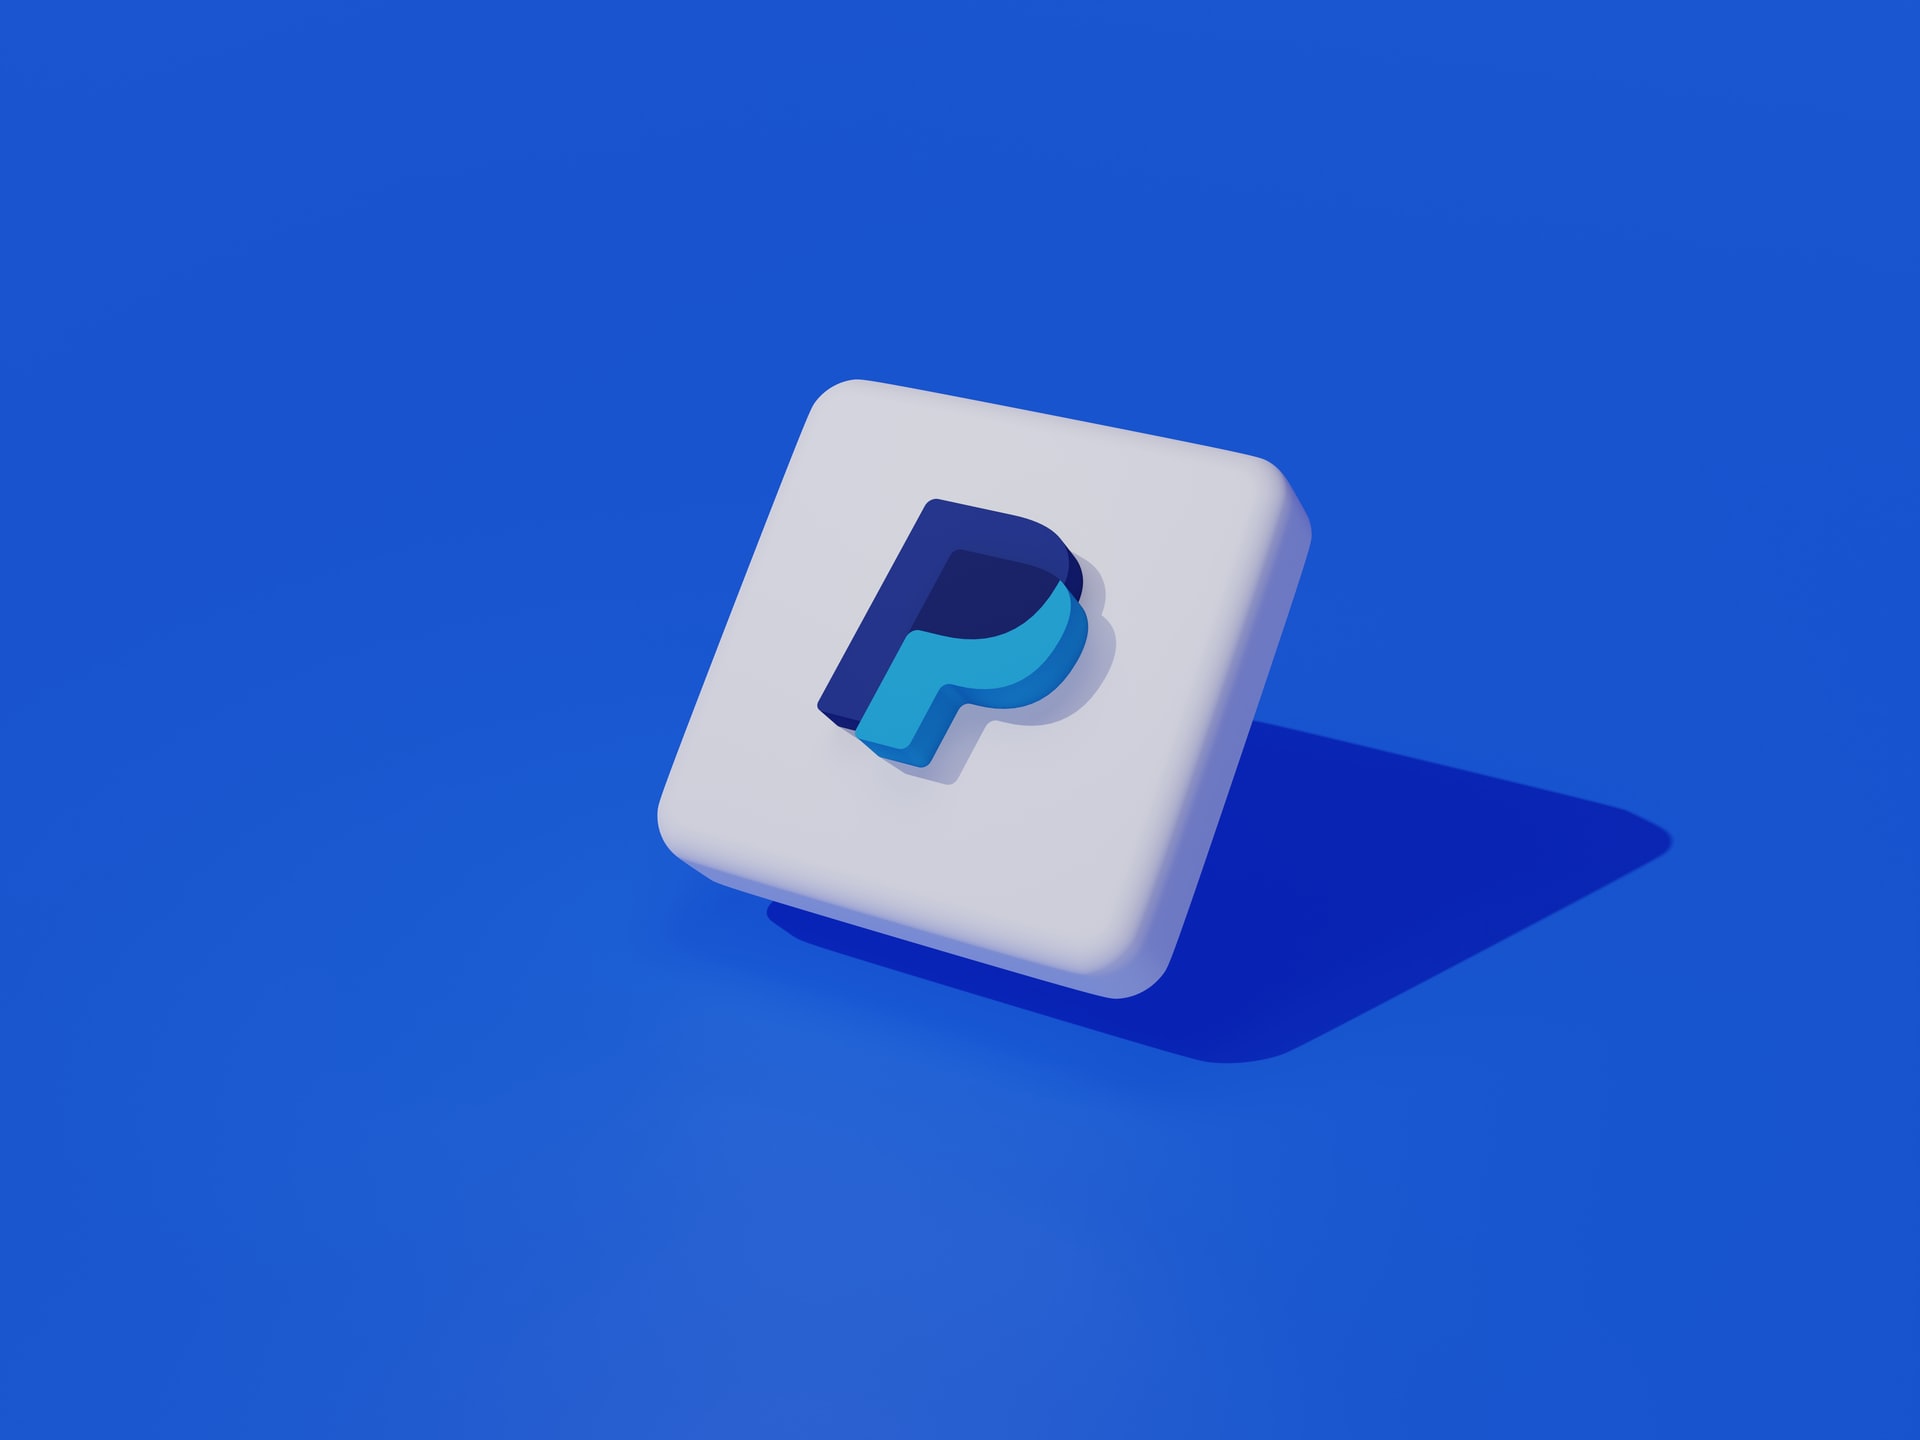 Paypal Wants Its Own Stablecoin. But Are They Crypto-Worthy?